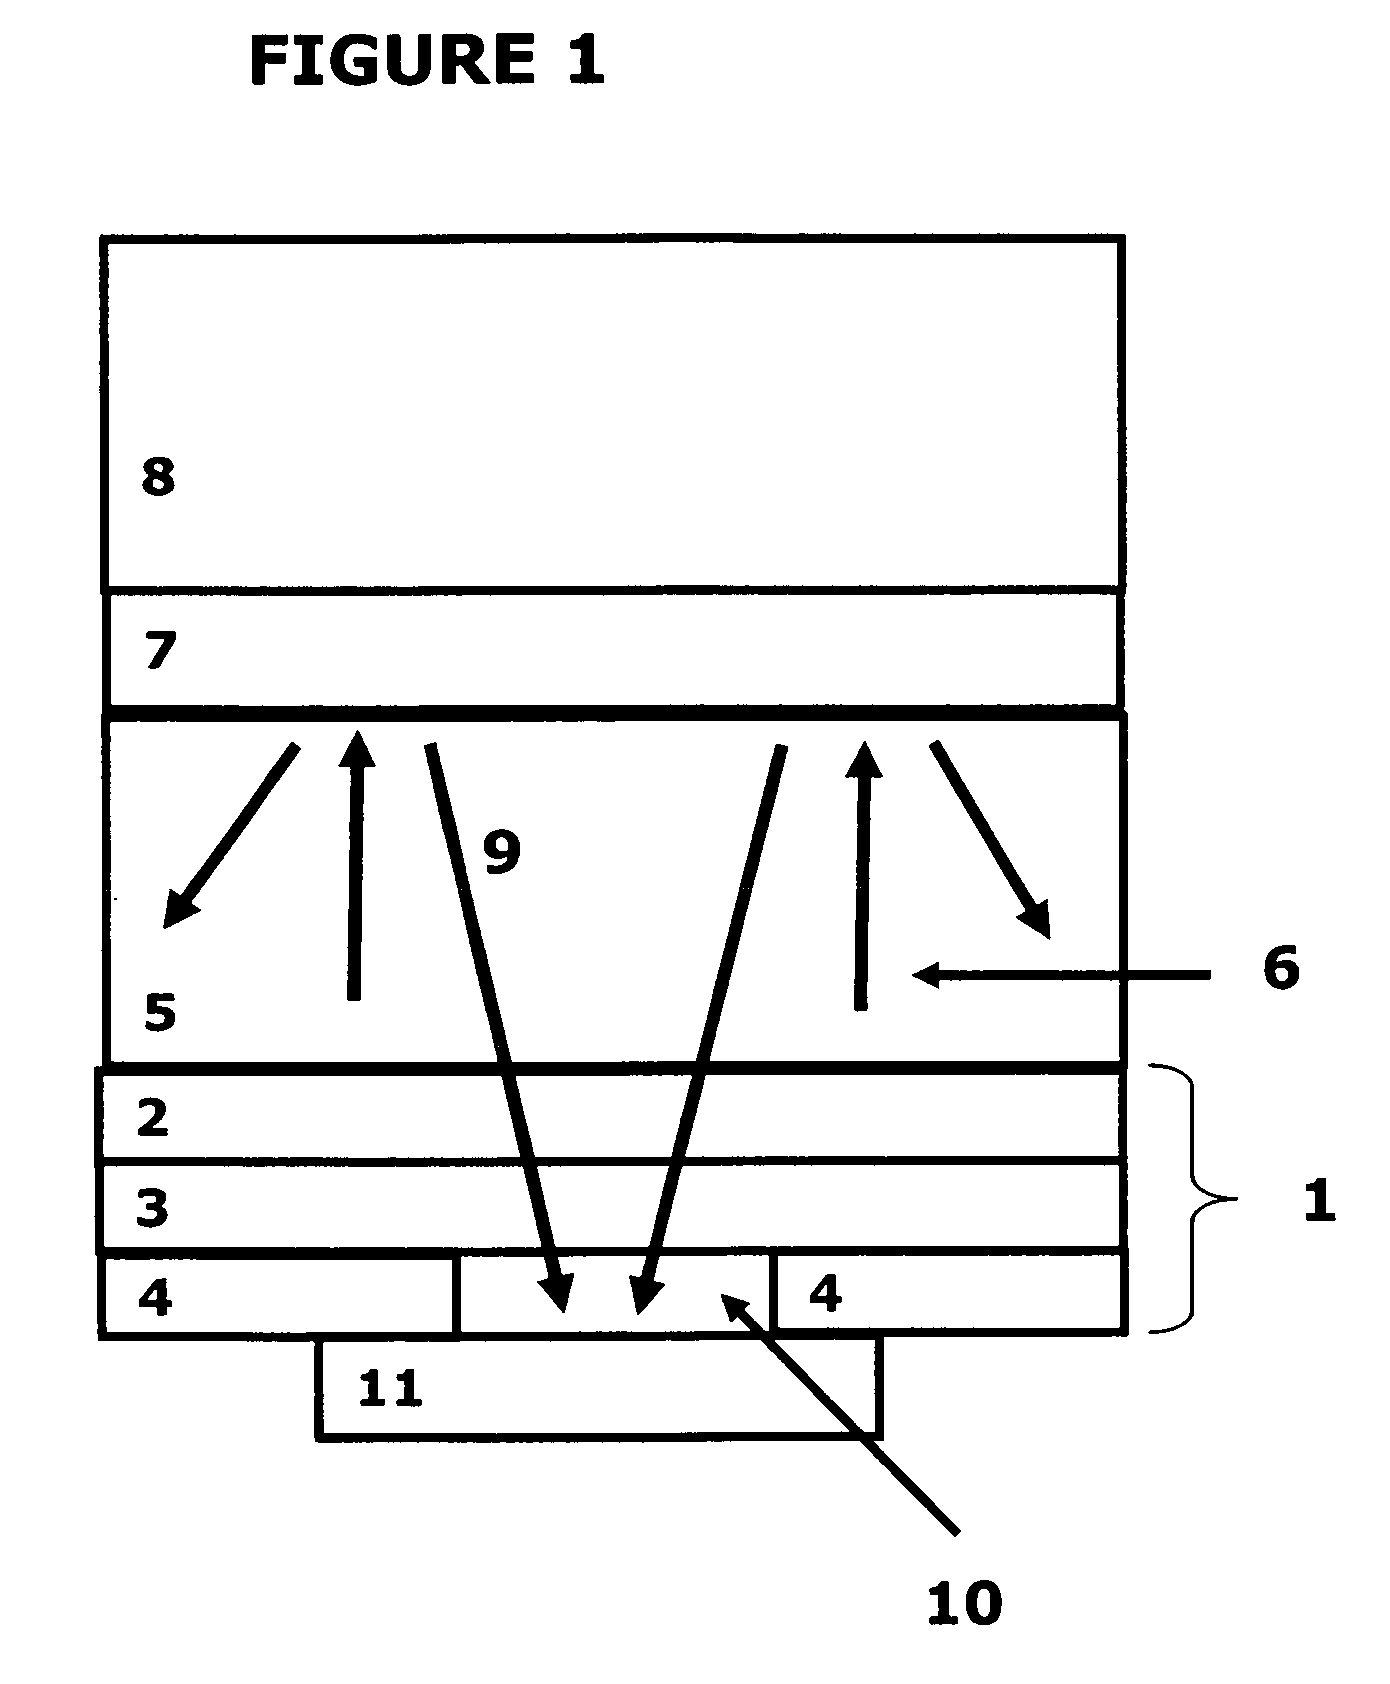 Integrated thin-film sensors and methods